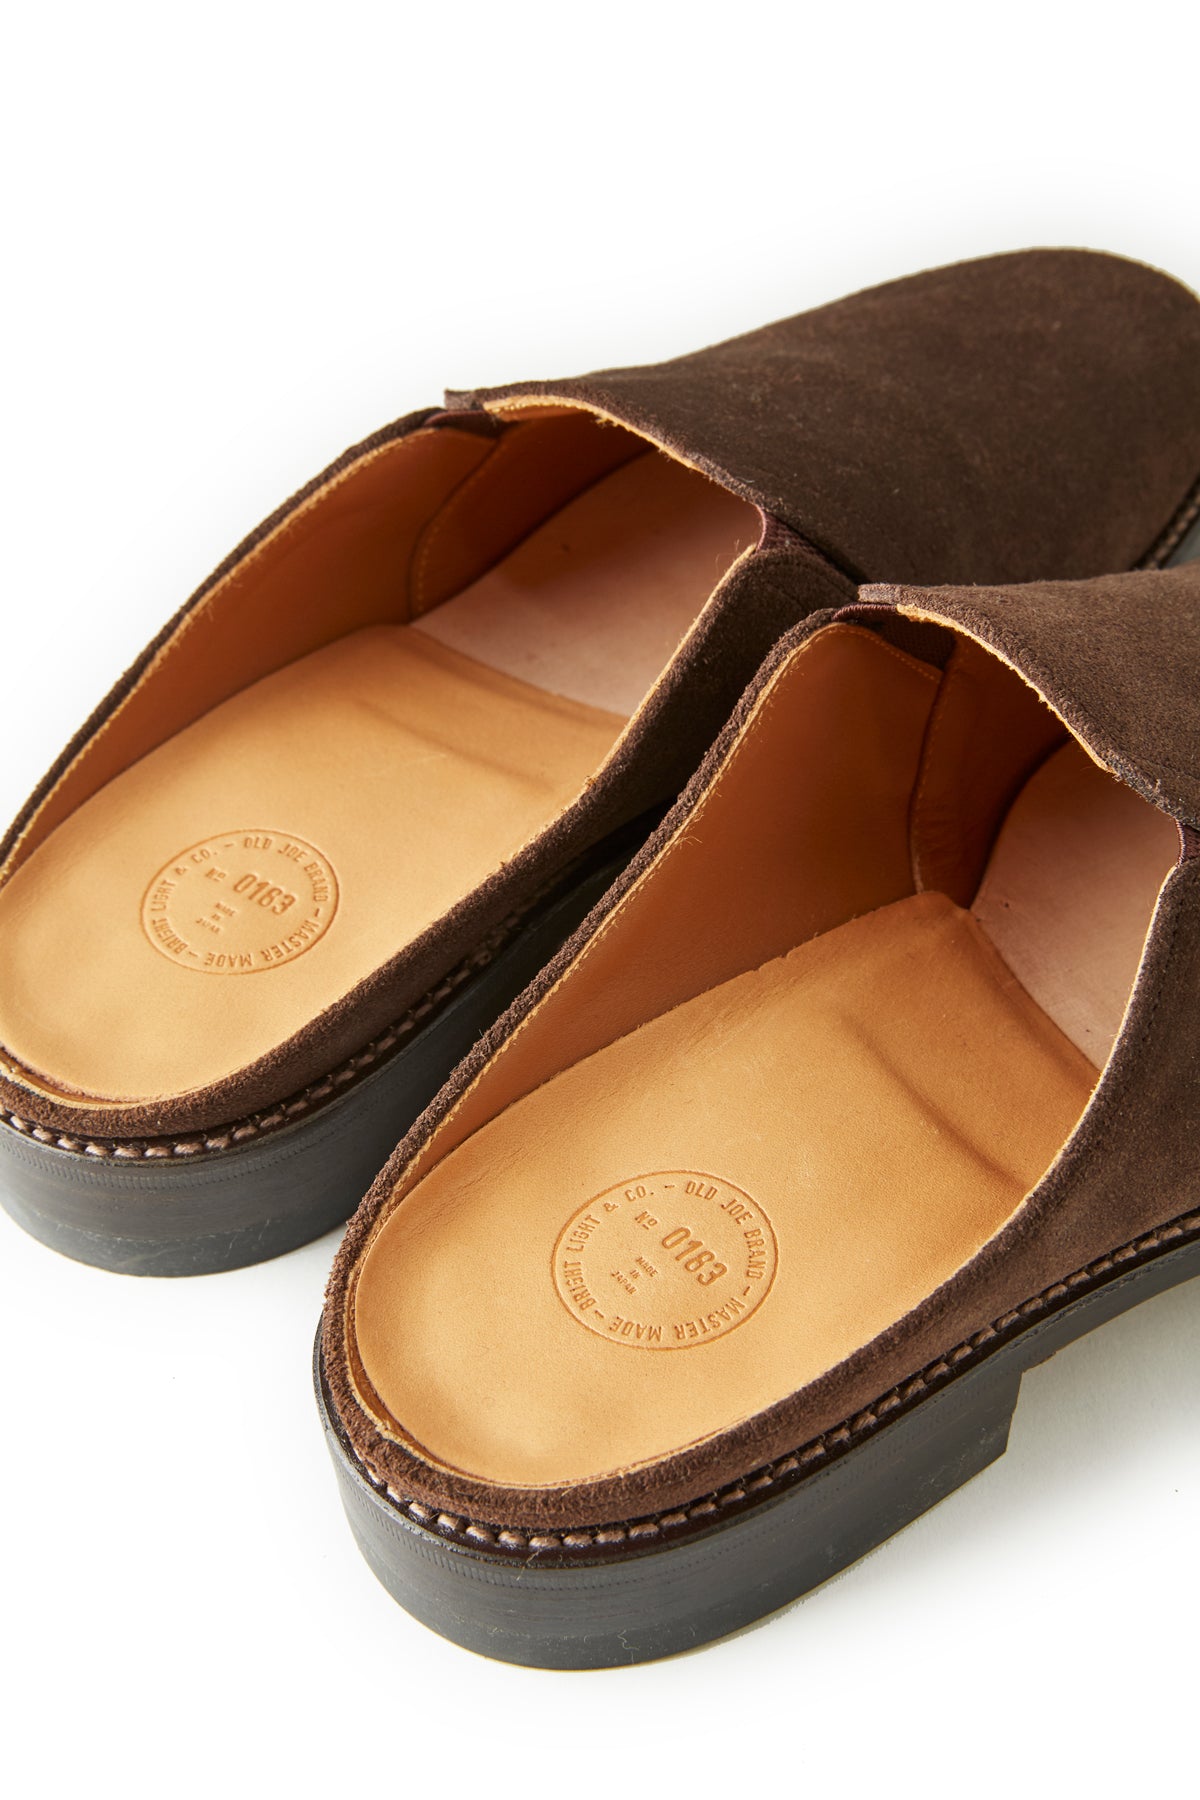 “The Loafer“ STUNNING LEATHER MULES - 231OJ-FW04